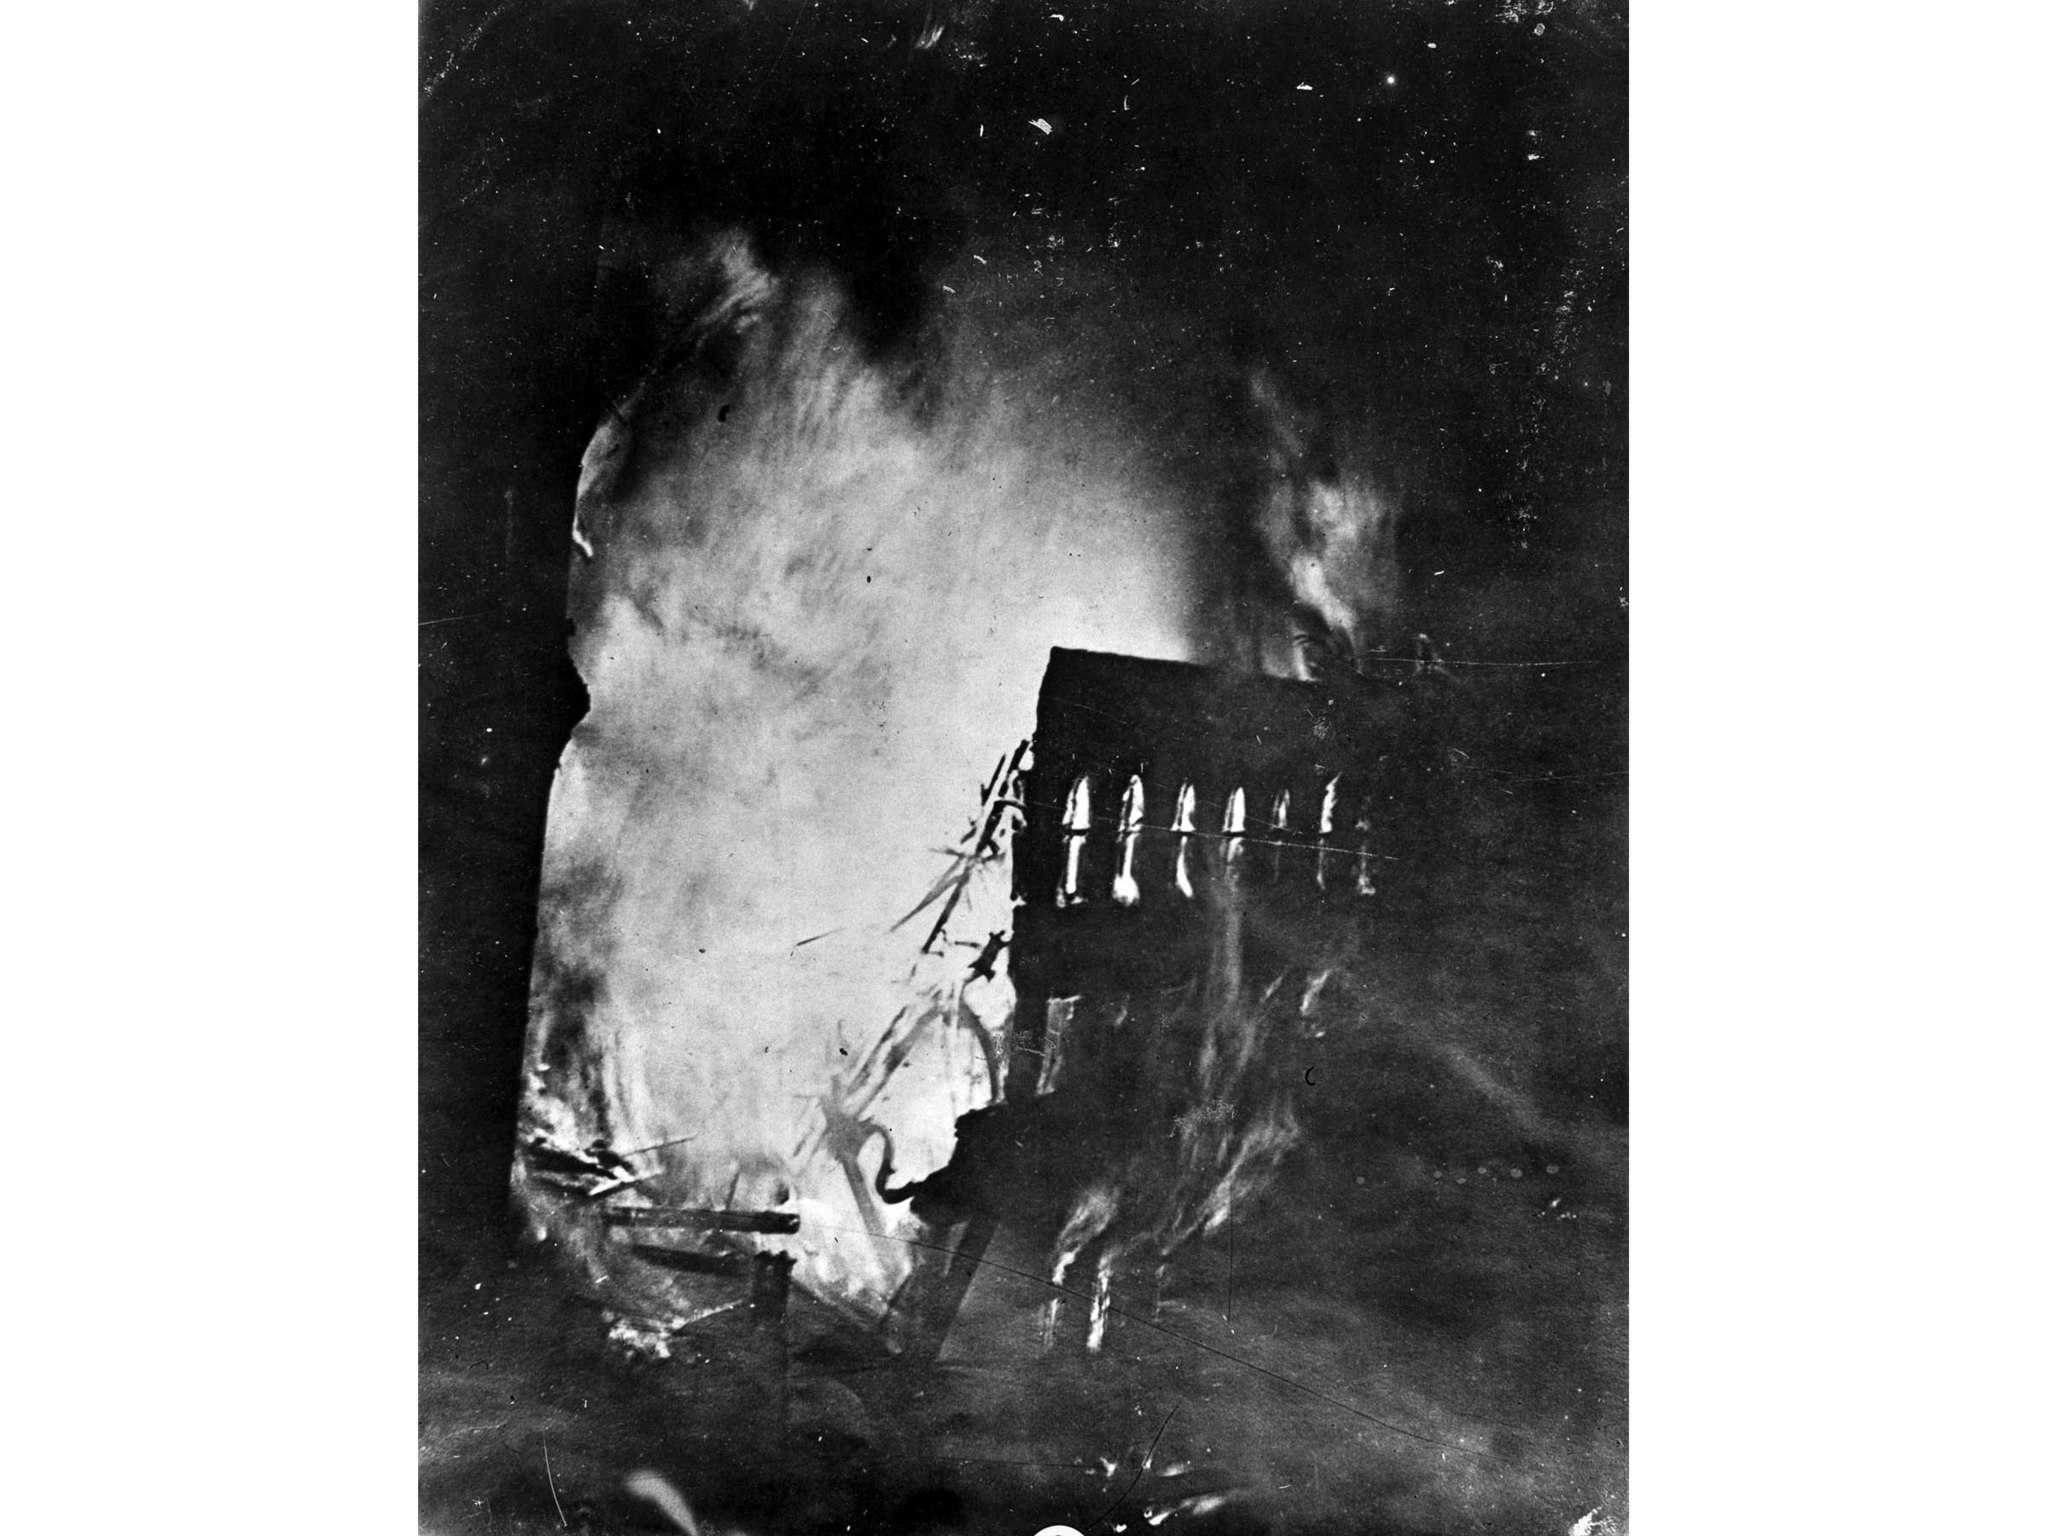 Oct. 1, 1910: Thirty minutes after the explosion, fire consumes the Times building.